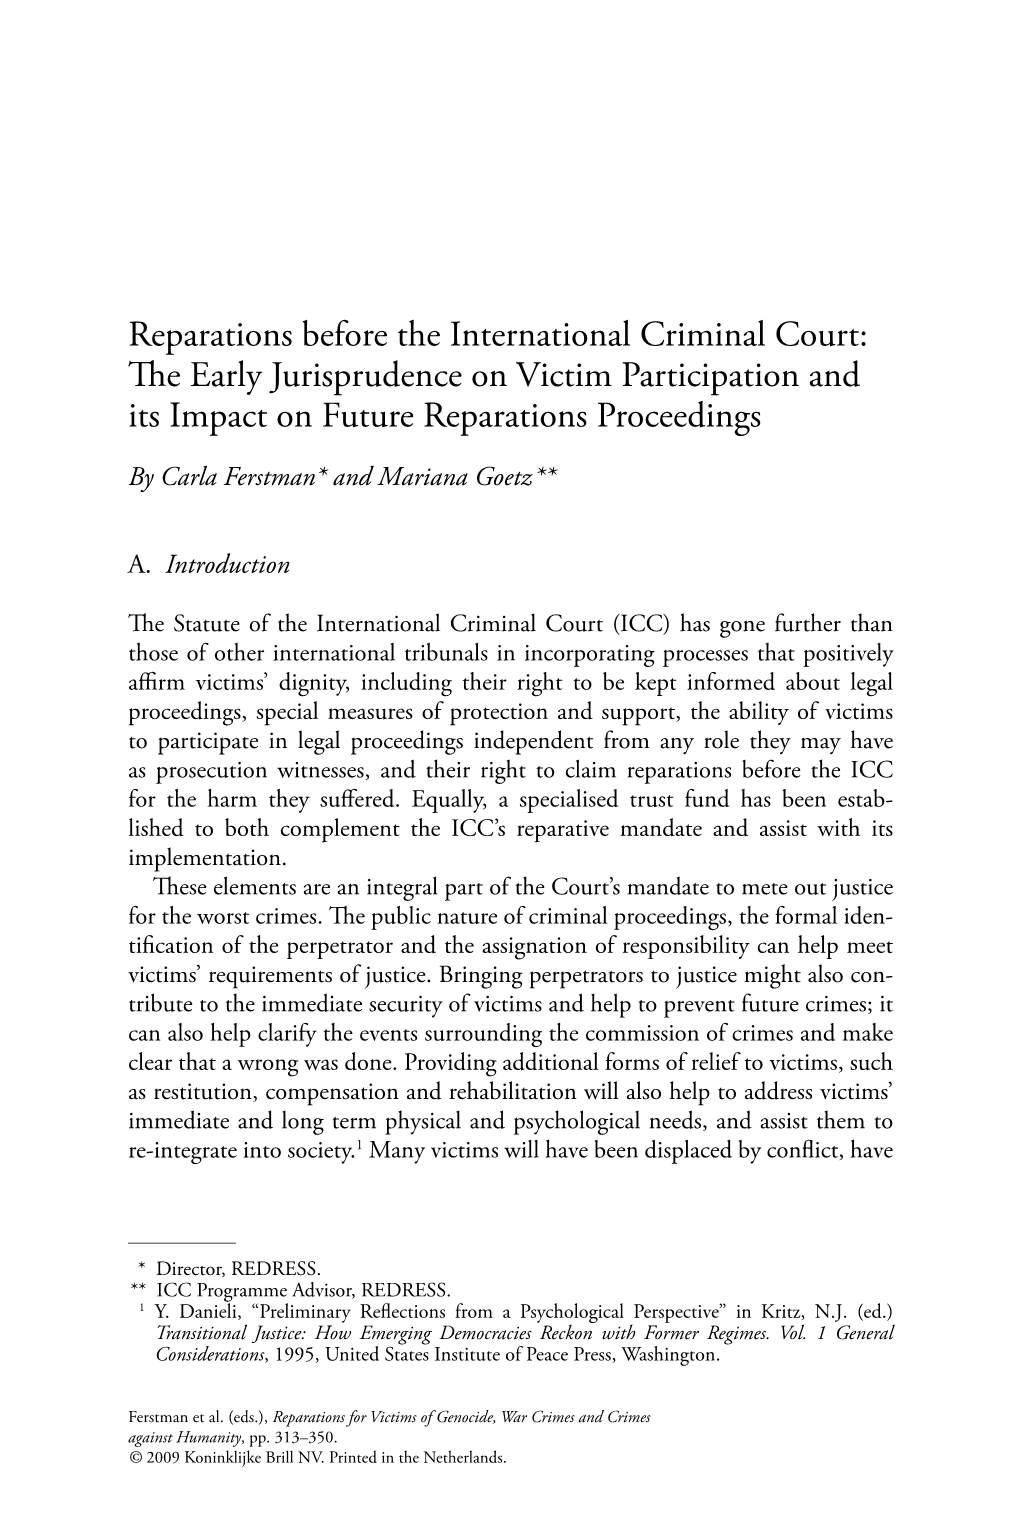 Reparations Before the International Criminal Court: Th E Early Jurisprudence on Victim Participation and Its Impact on Future Reparations Proceedings